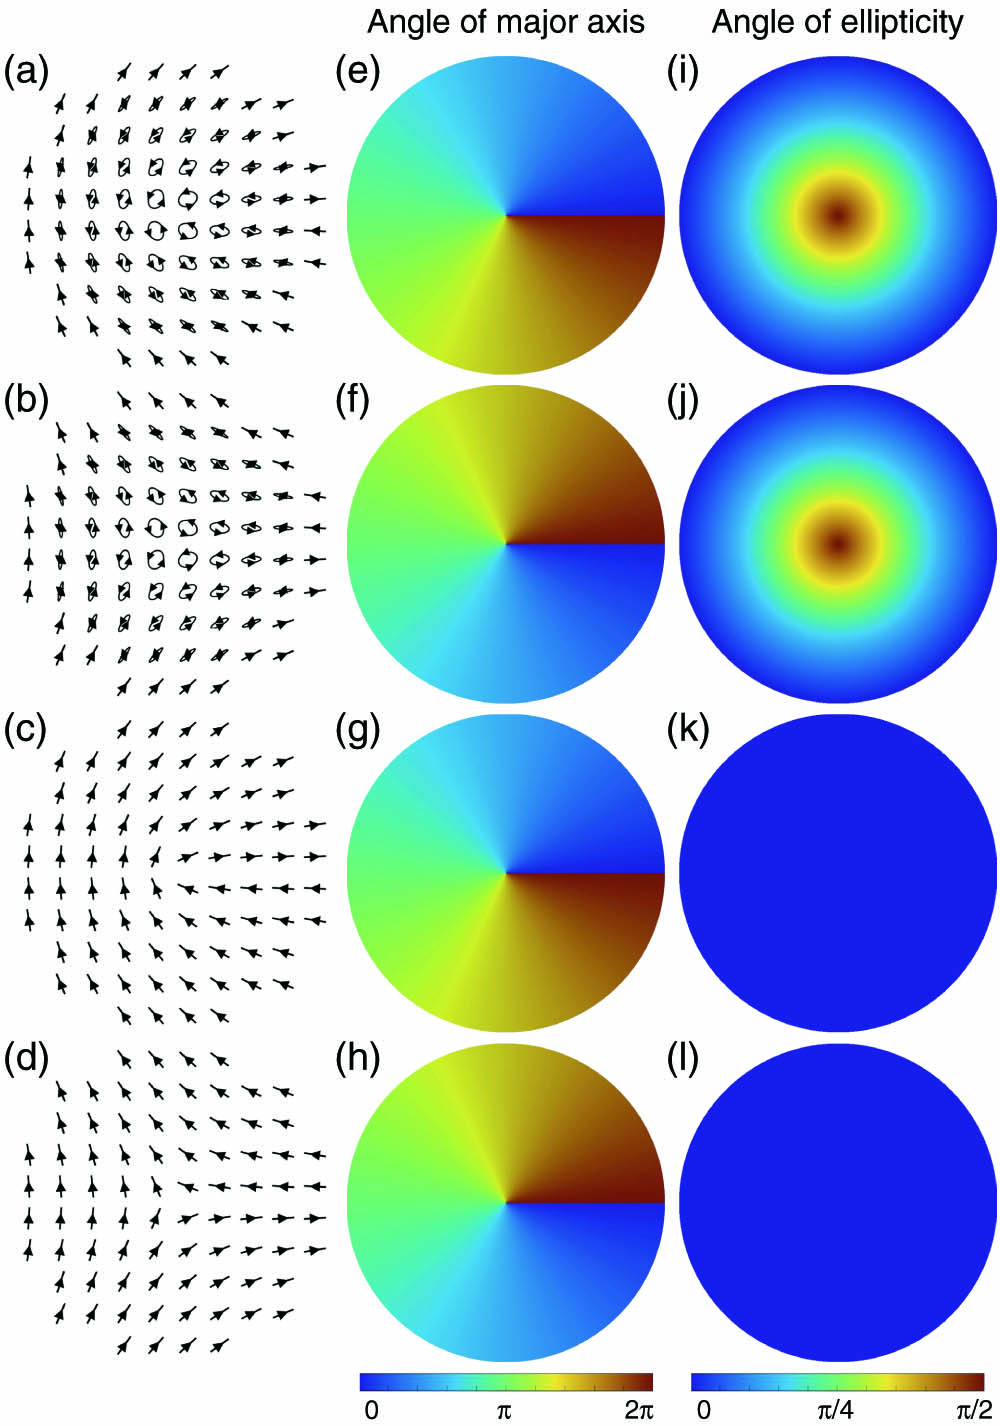 Distributions of polarization states of four polarization singularities. (a) Lemon C-point with m=0.5 and τ=r, (b) star C-point with m=−0.5 and τ=r, (c) lemon V-point with m=0.5 and τ=1, and (d) star V-point with m=−0.5 and τ=1. (e)–(h) Corresponding distributions of the orientation angles of the major axes of polarization states to (a)–(d), respectively. (i)–(l) Corresponding distributions of the angles of ellipticity of the polarization states to (a)–(d), respectively.